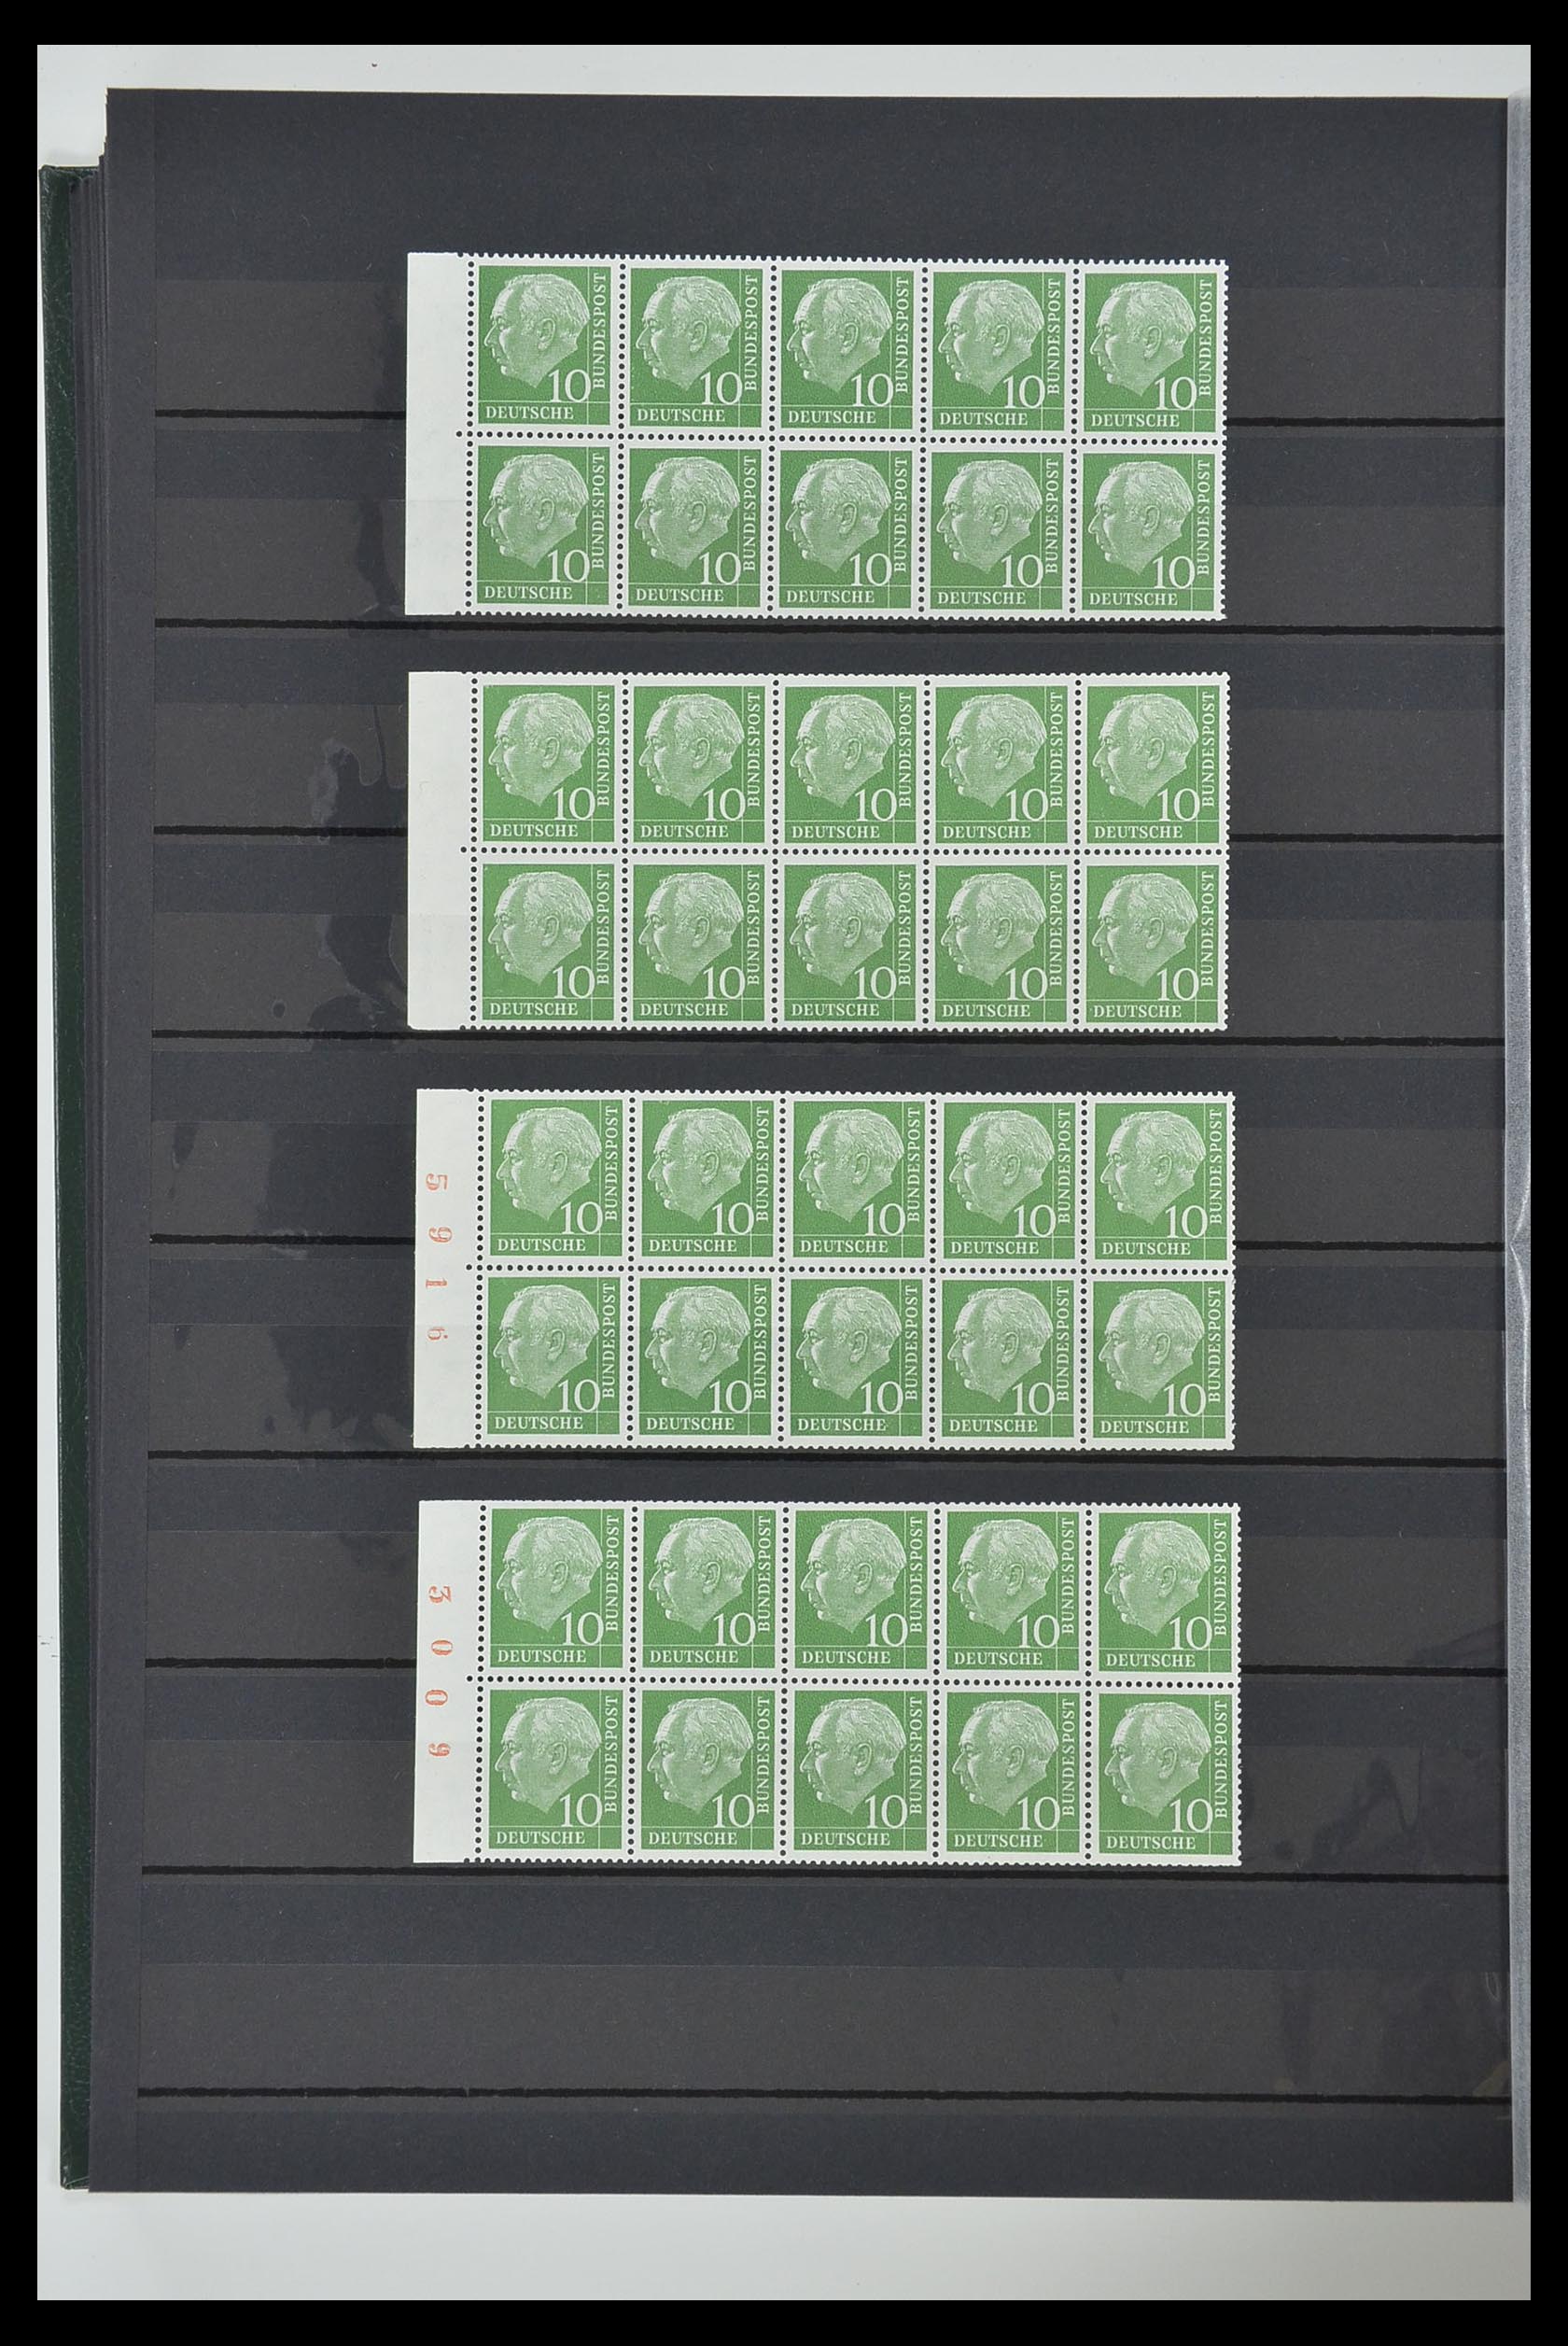 33275 040 - Stamp collection 33275 Bundespost combinations 1951-1960.